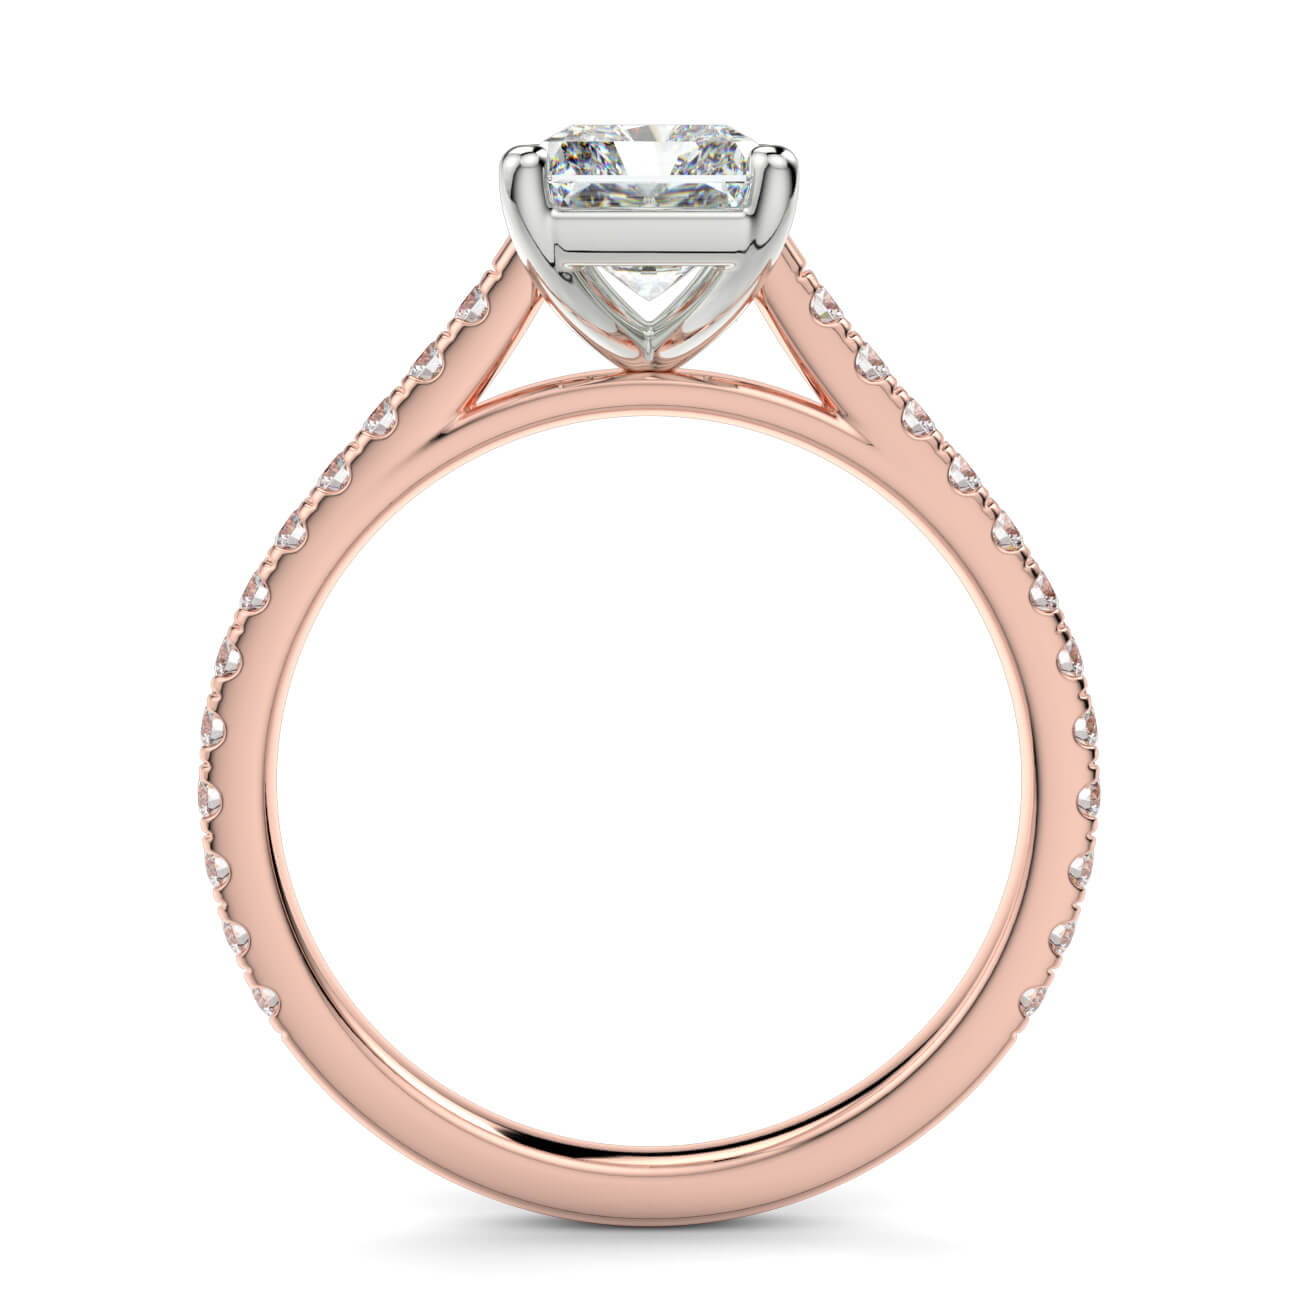 Radiant cut diamond cathedral engagement ring in rose and white gold – Australian Diamond Network